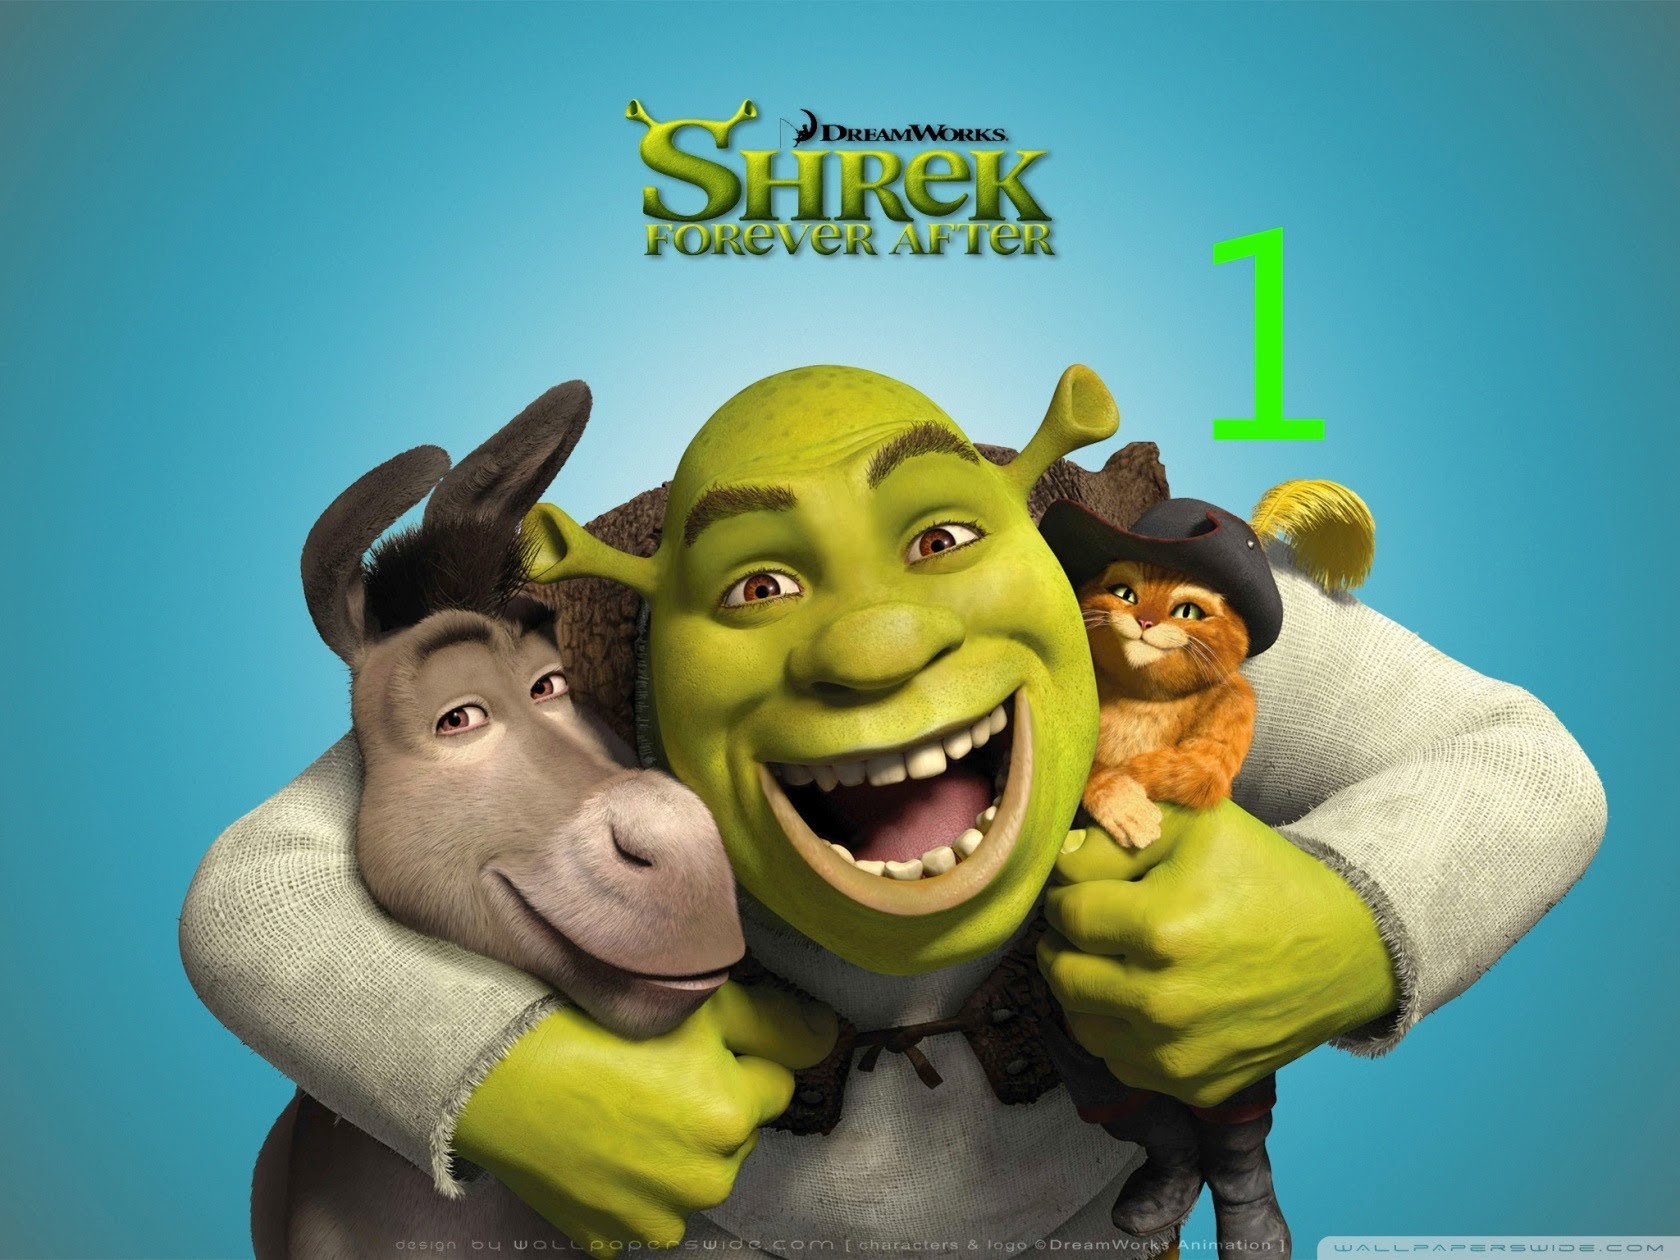 Shrek Forever After Backgrounds, Compatible - PC, Mobile, Gadgets| 1680x1260 px